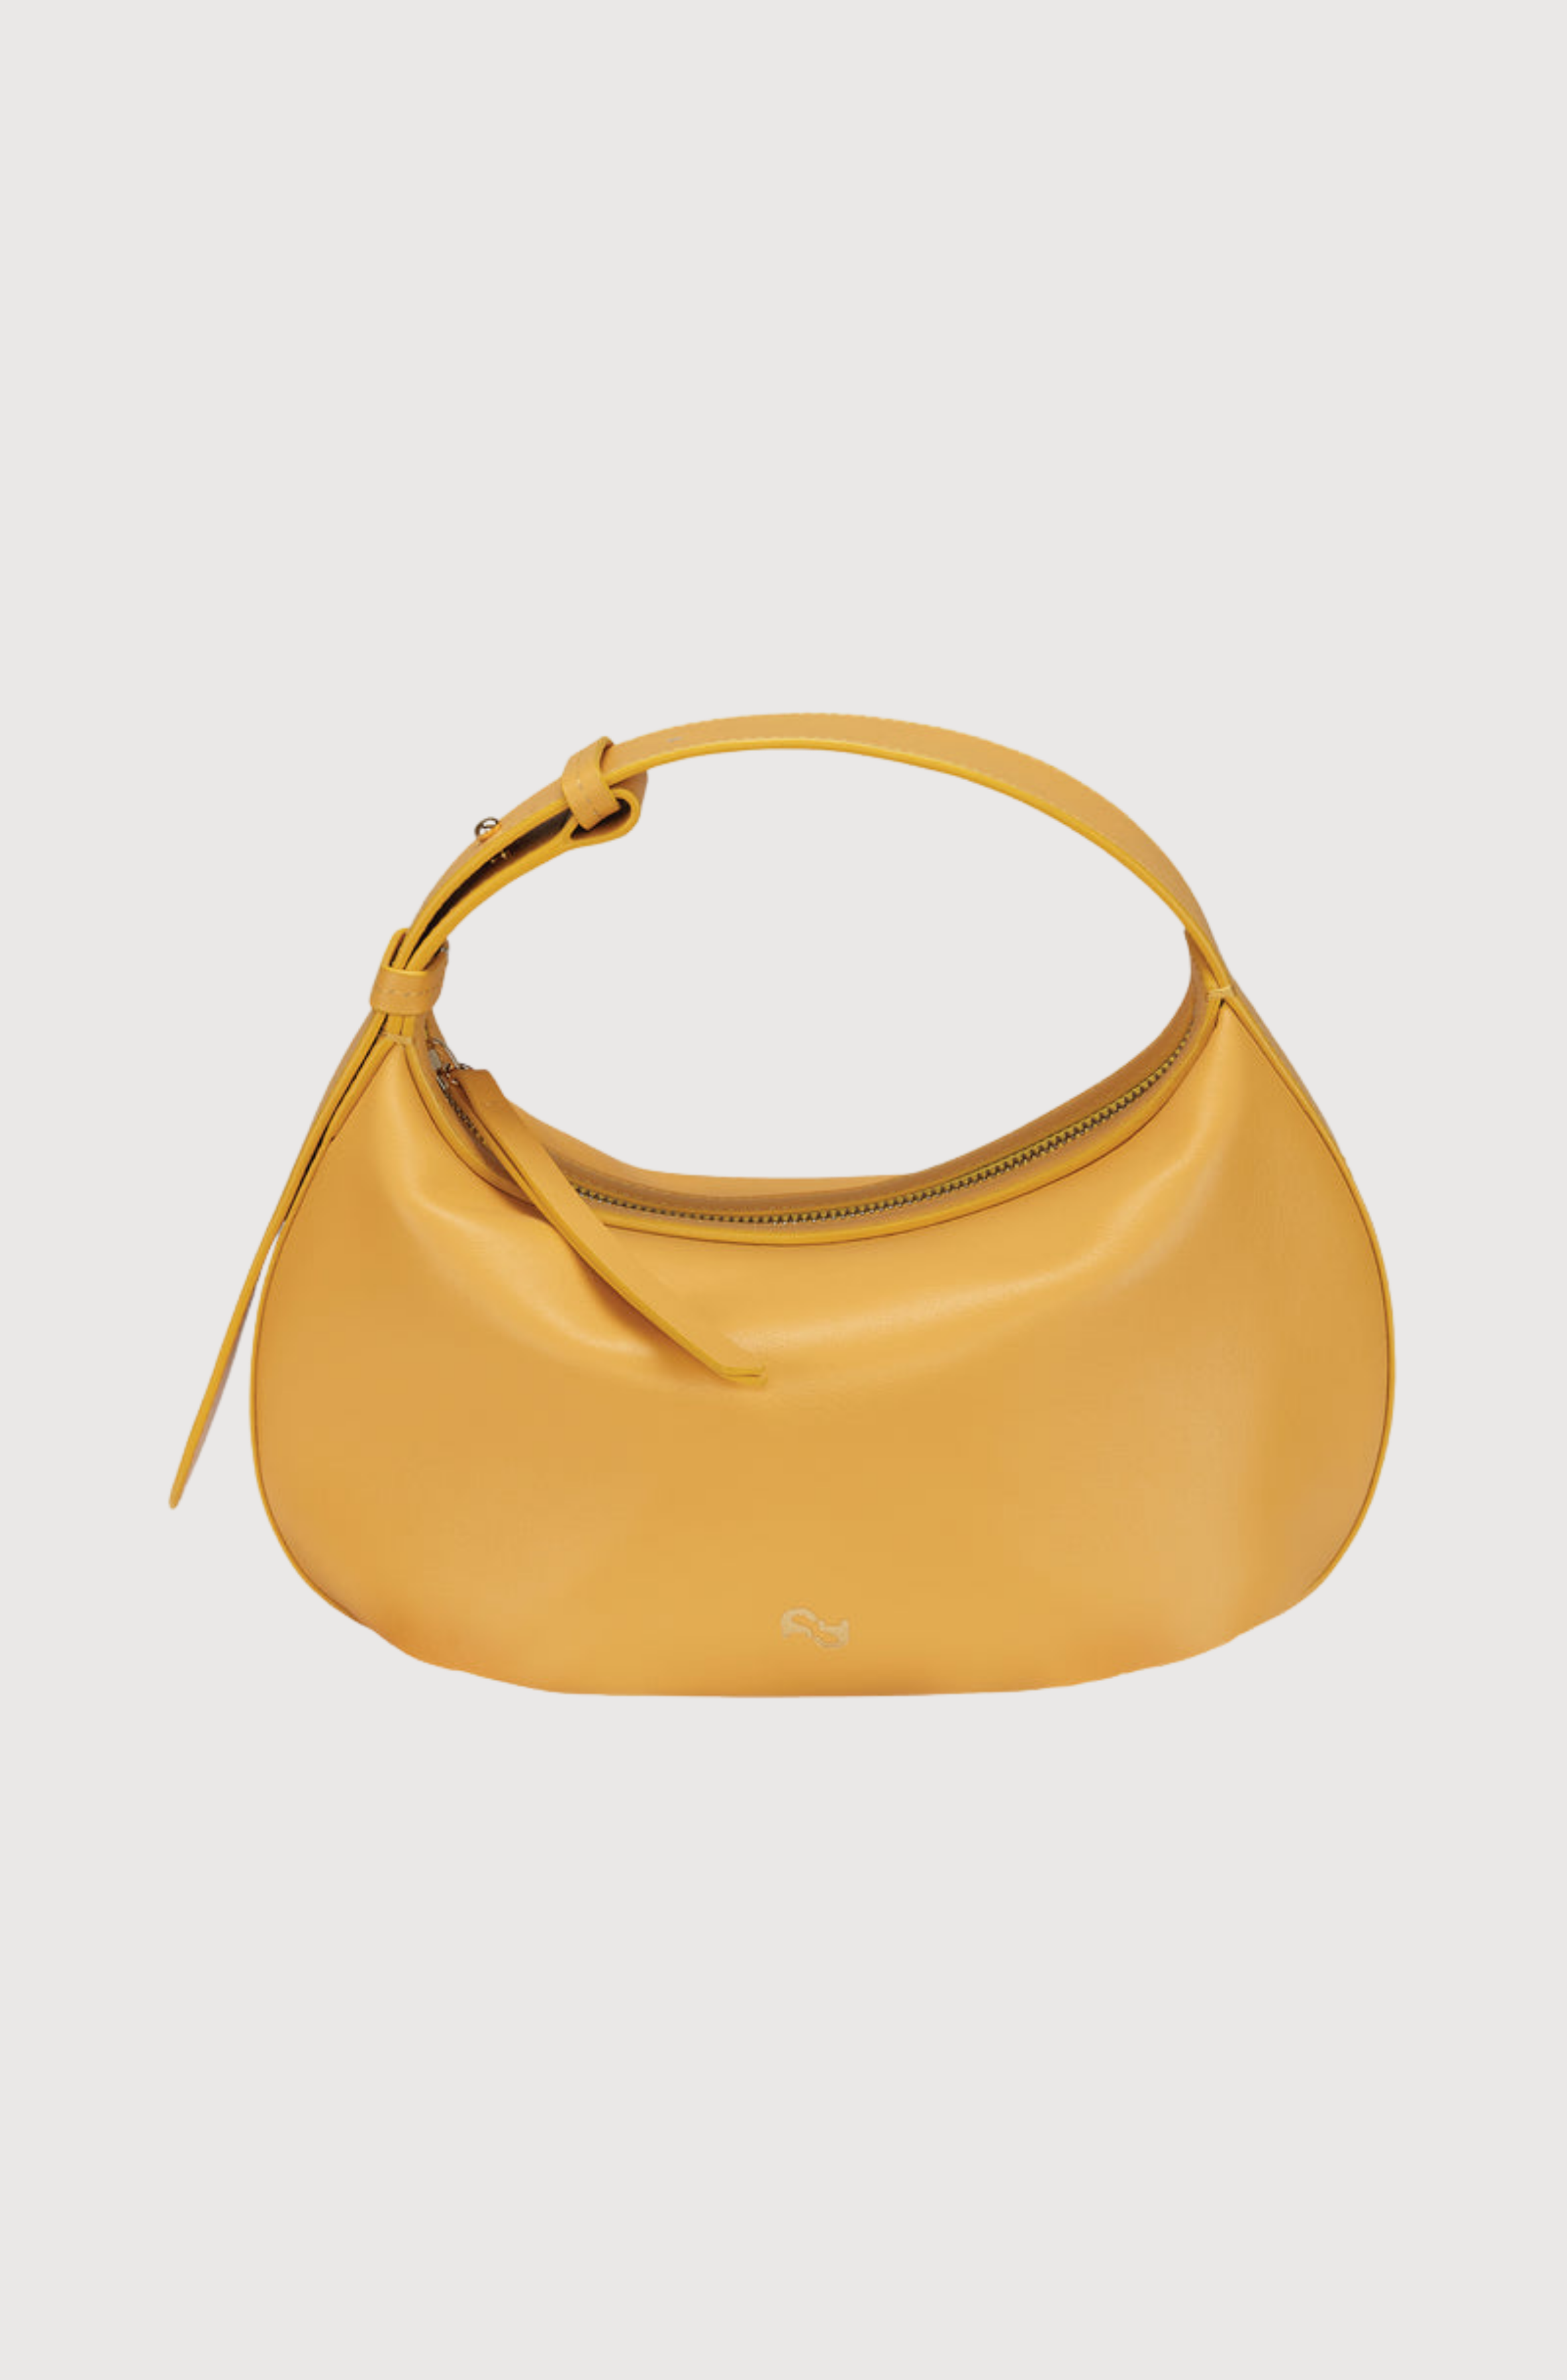 BY FAR Yellow Patent Baby Amber Bag